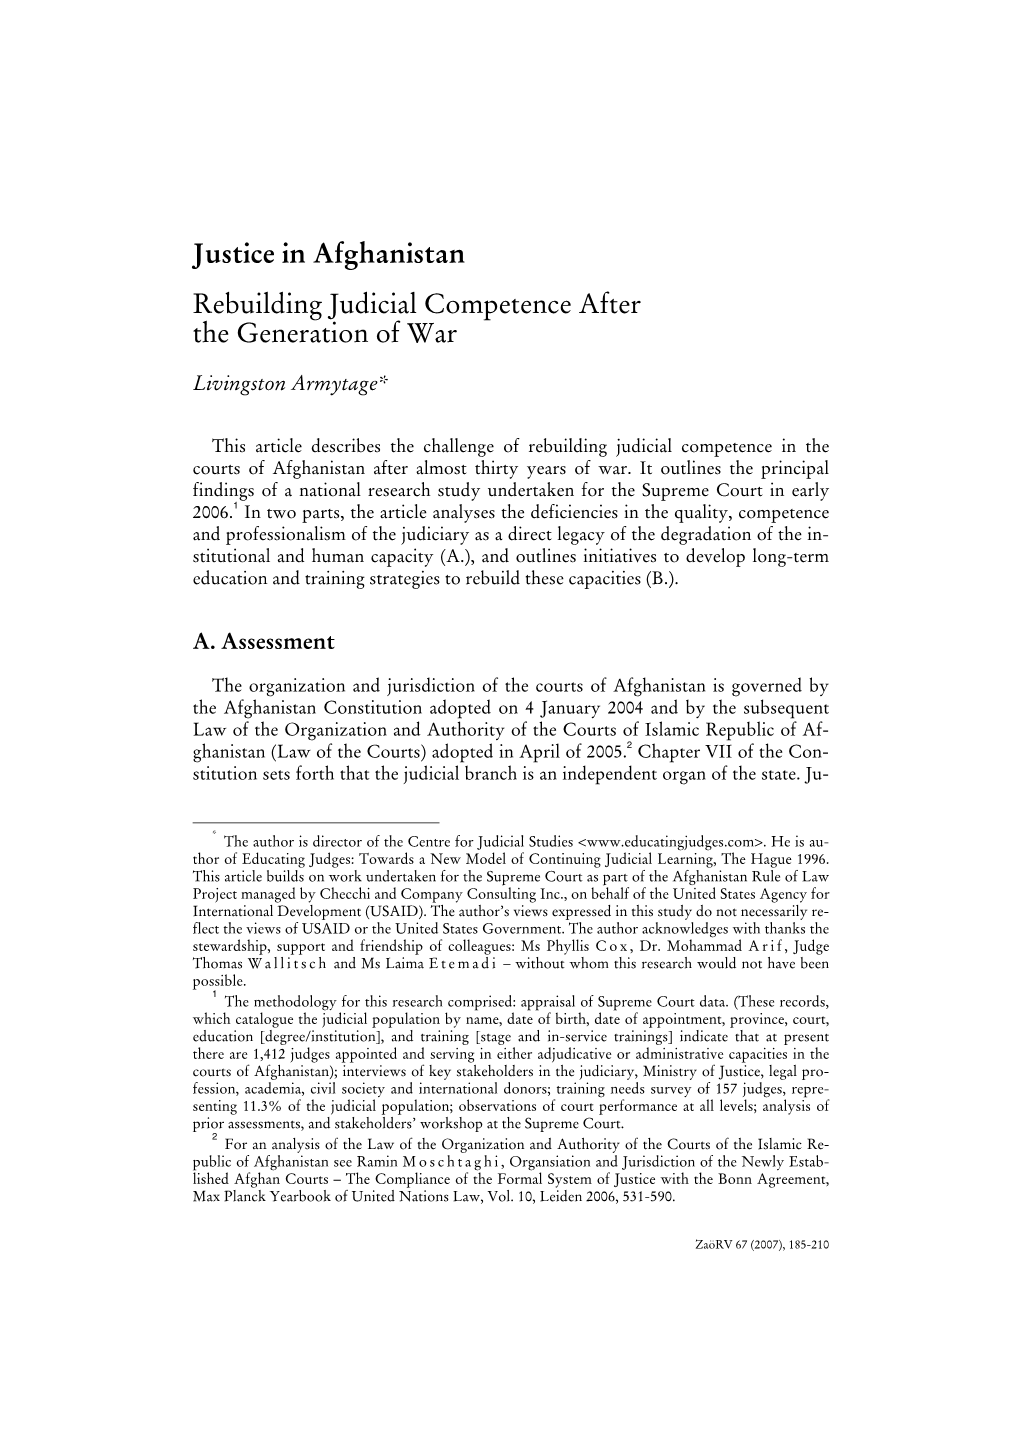 Justice in Afghanistan Rebuilding Judicial Competence After the Generation of War